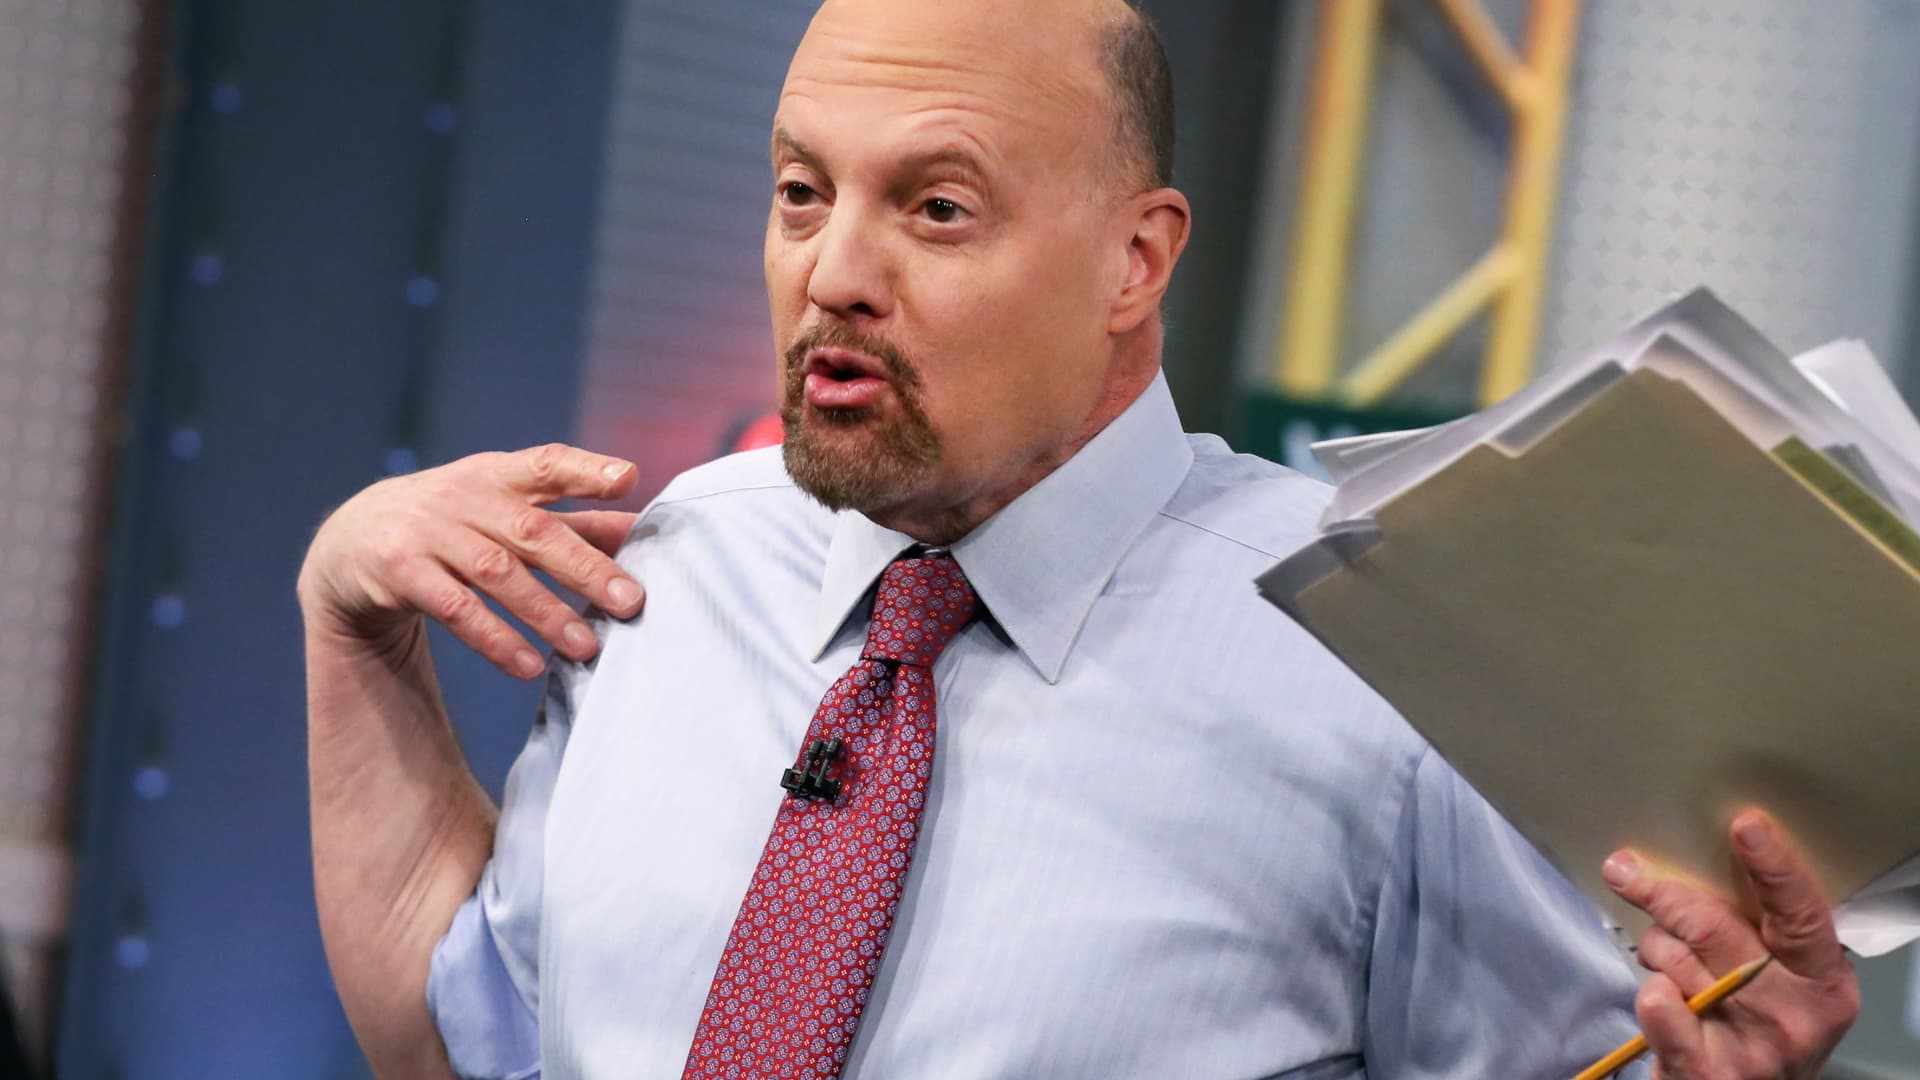 Charts suggest now is the perfect time to buy gold, Jim Cramer says